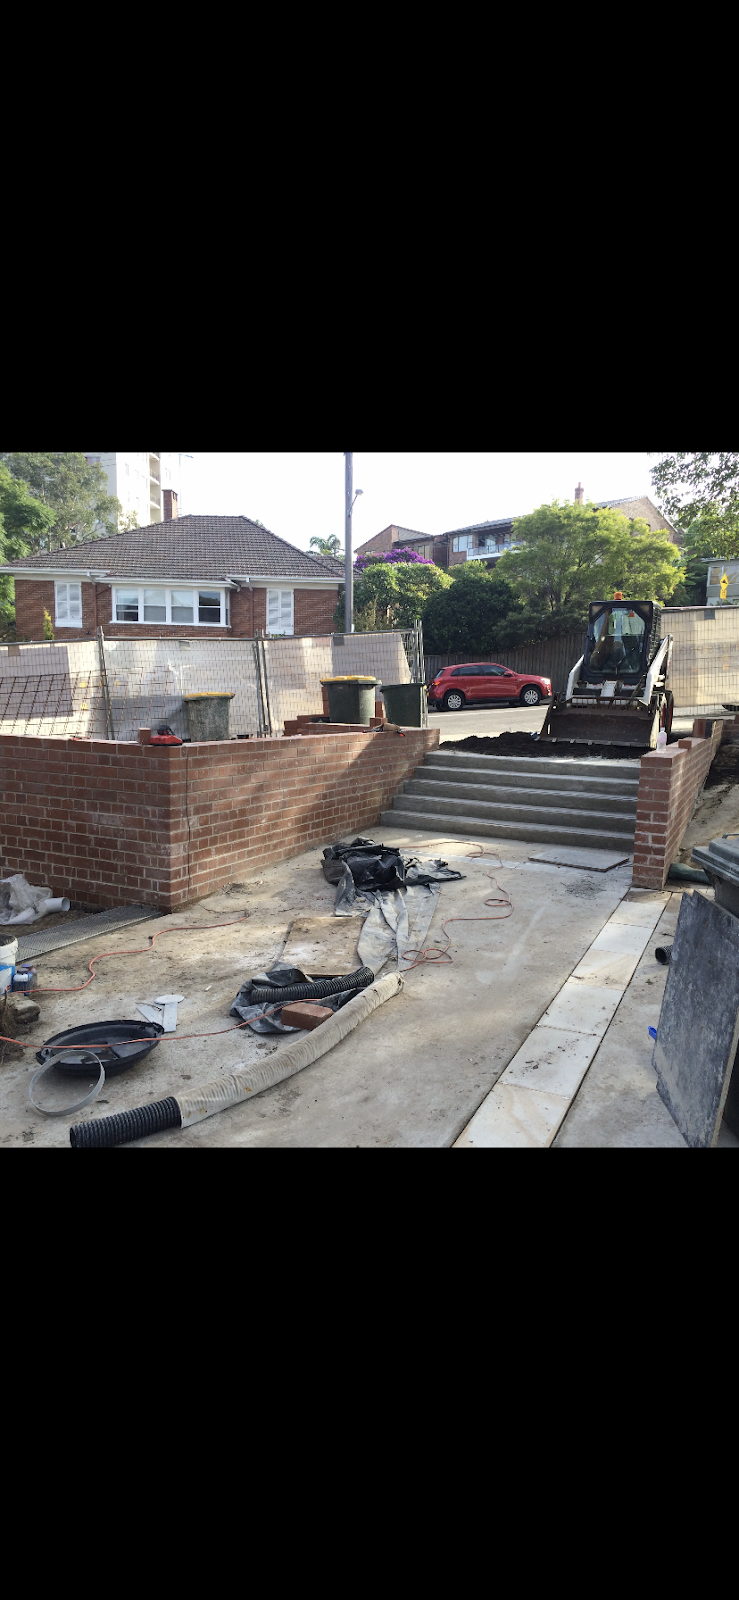 RDV Excavations | general contractor | 8 Brentwood Ave, Point Clare NSW 2250, Australia | 0418220372 OR +61 418 220 372